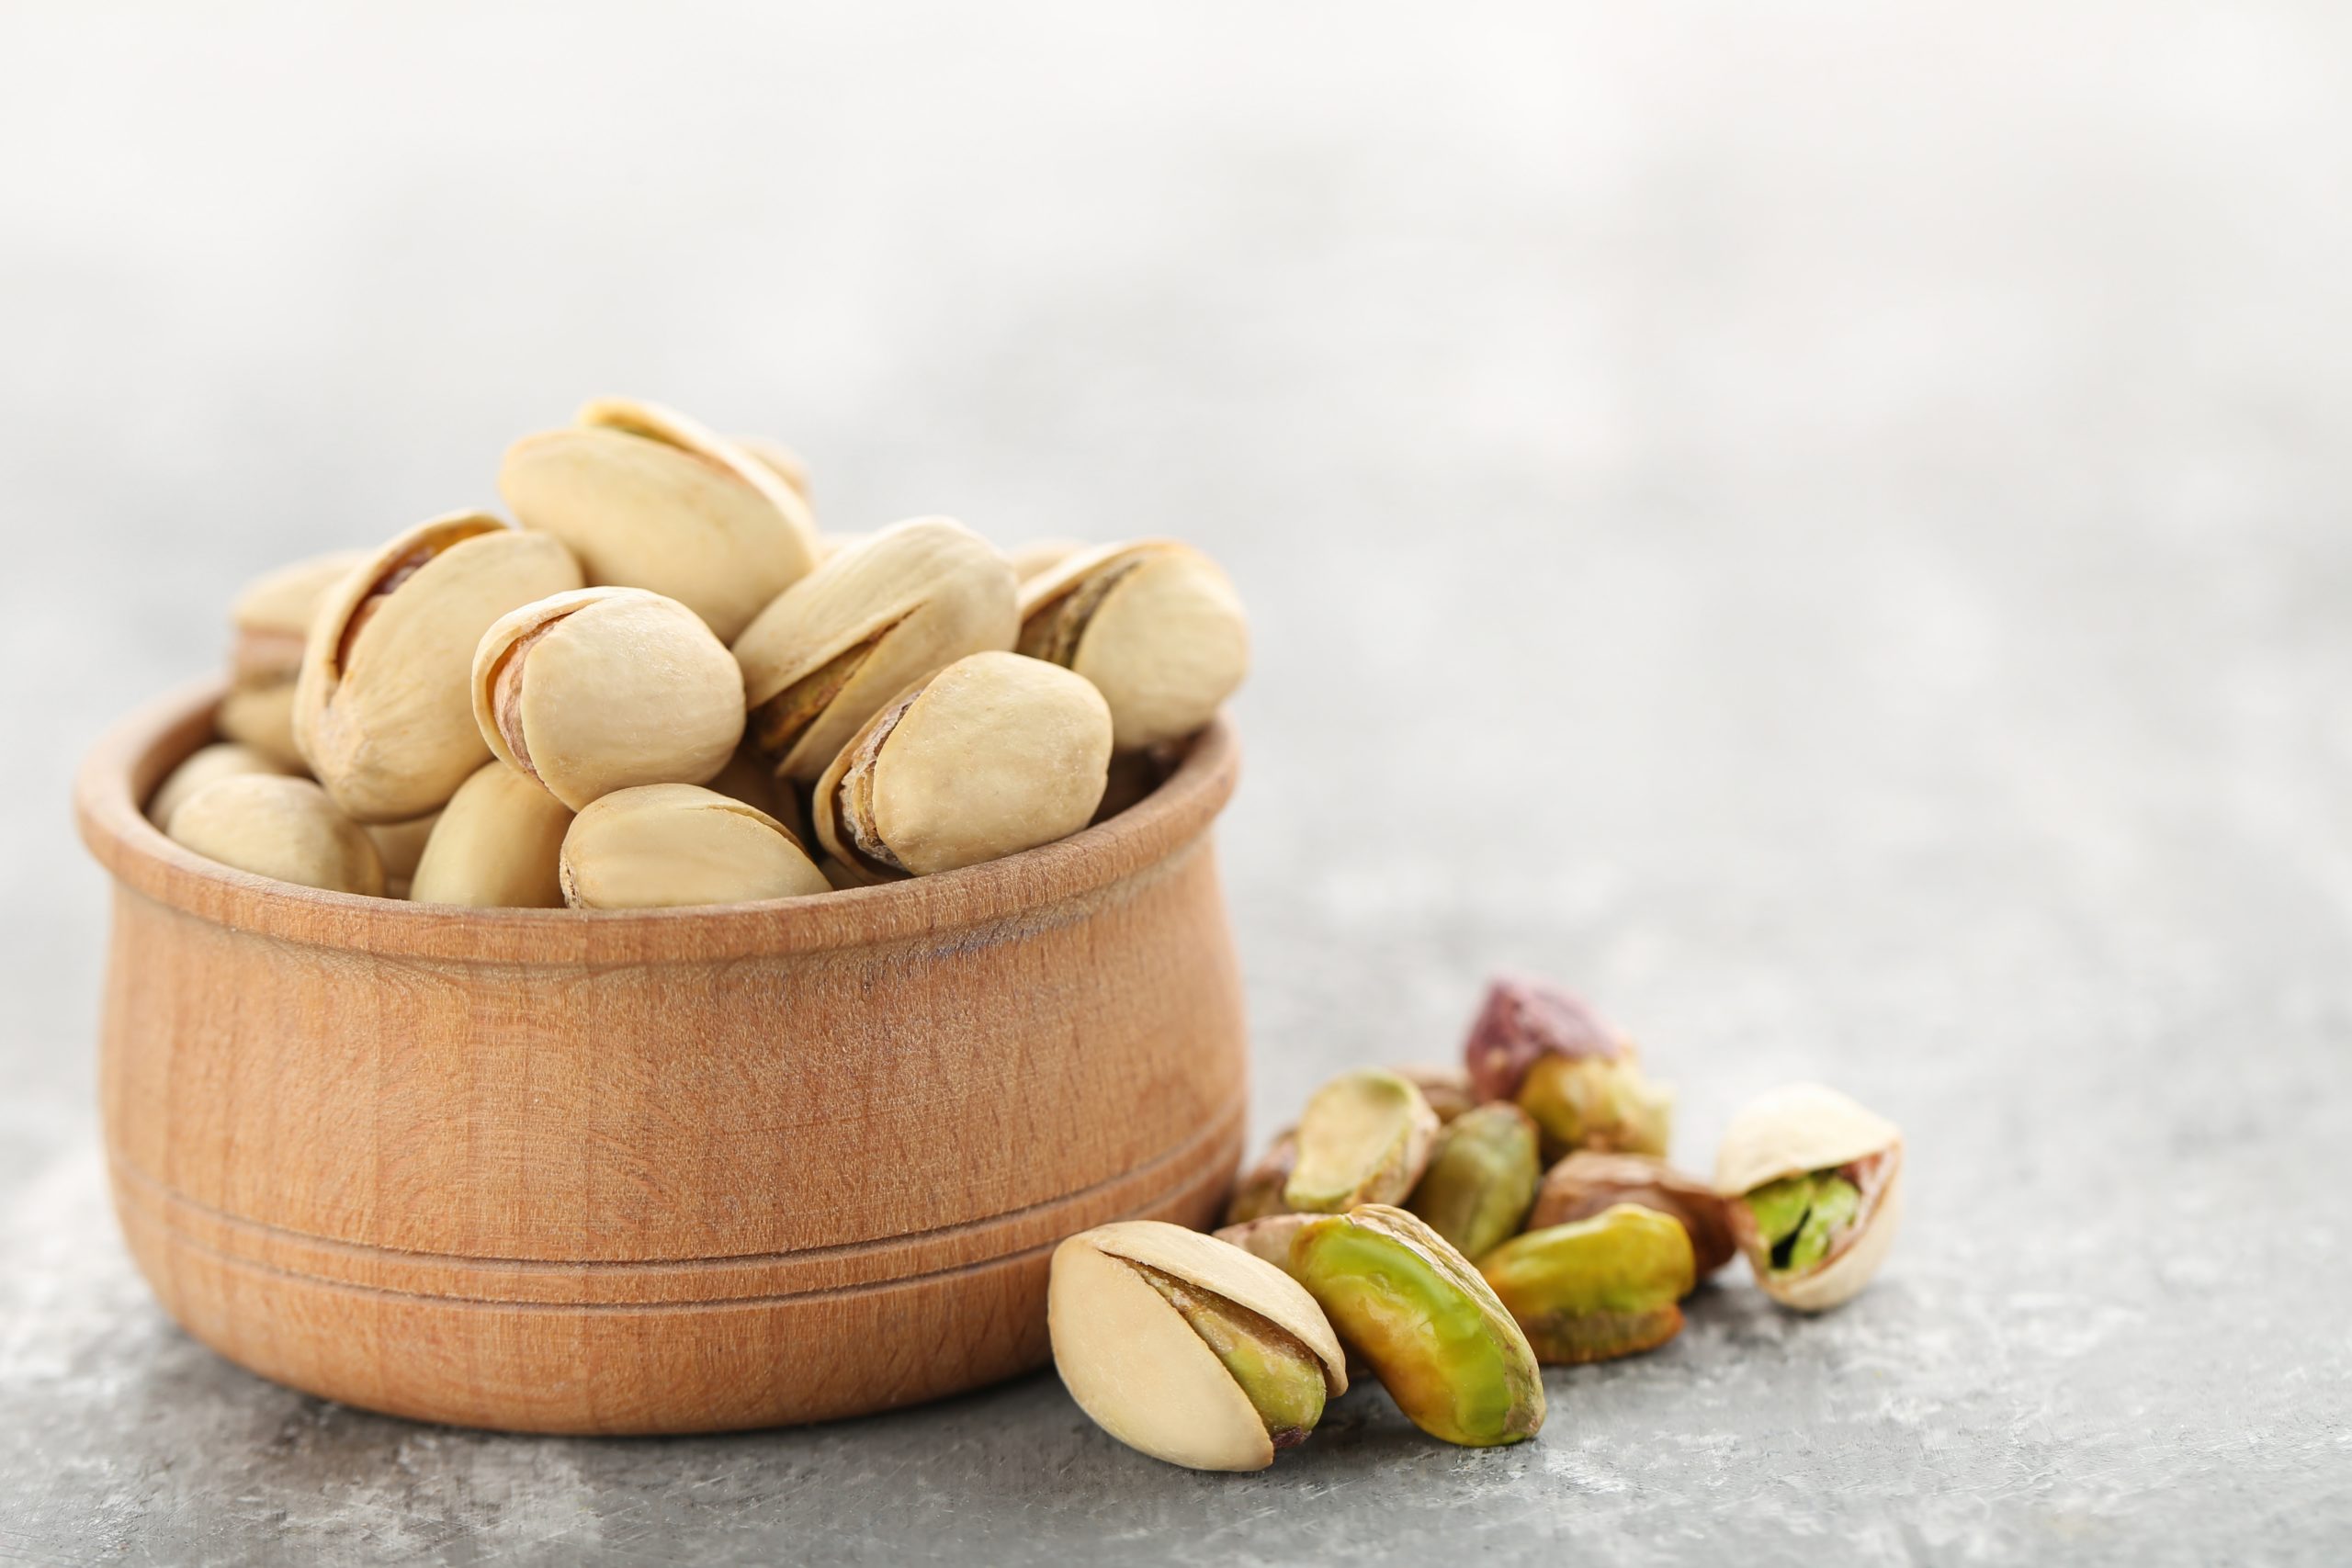 How To Store Pistachio Nuts